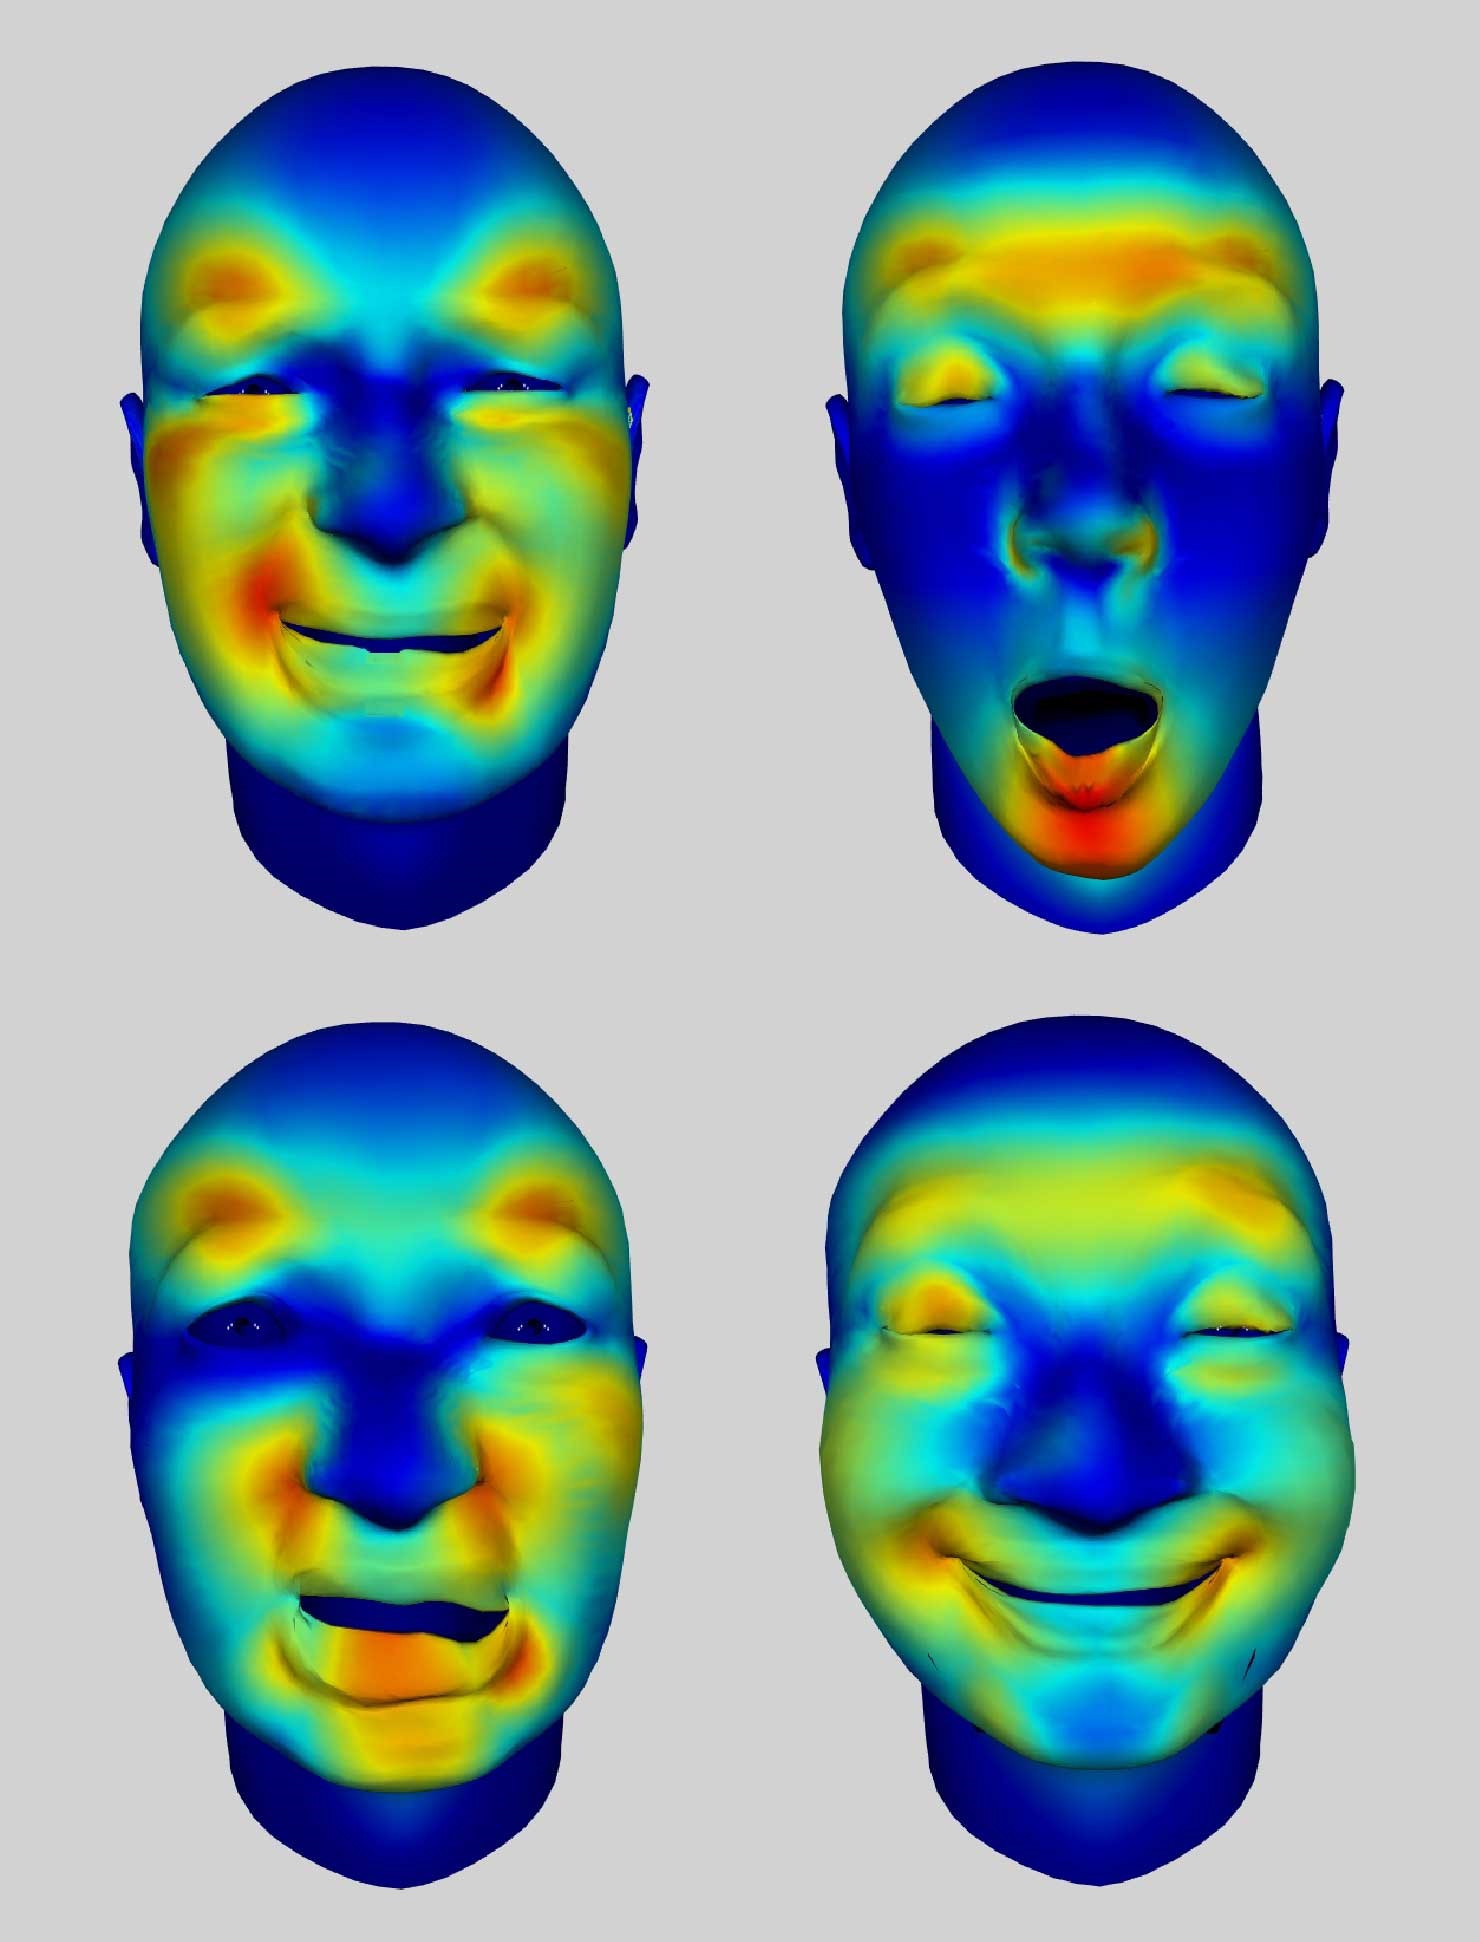 Dmu Research Challenges Popular Theories Of Facial Expression